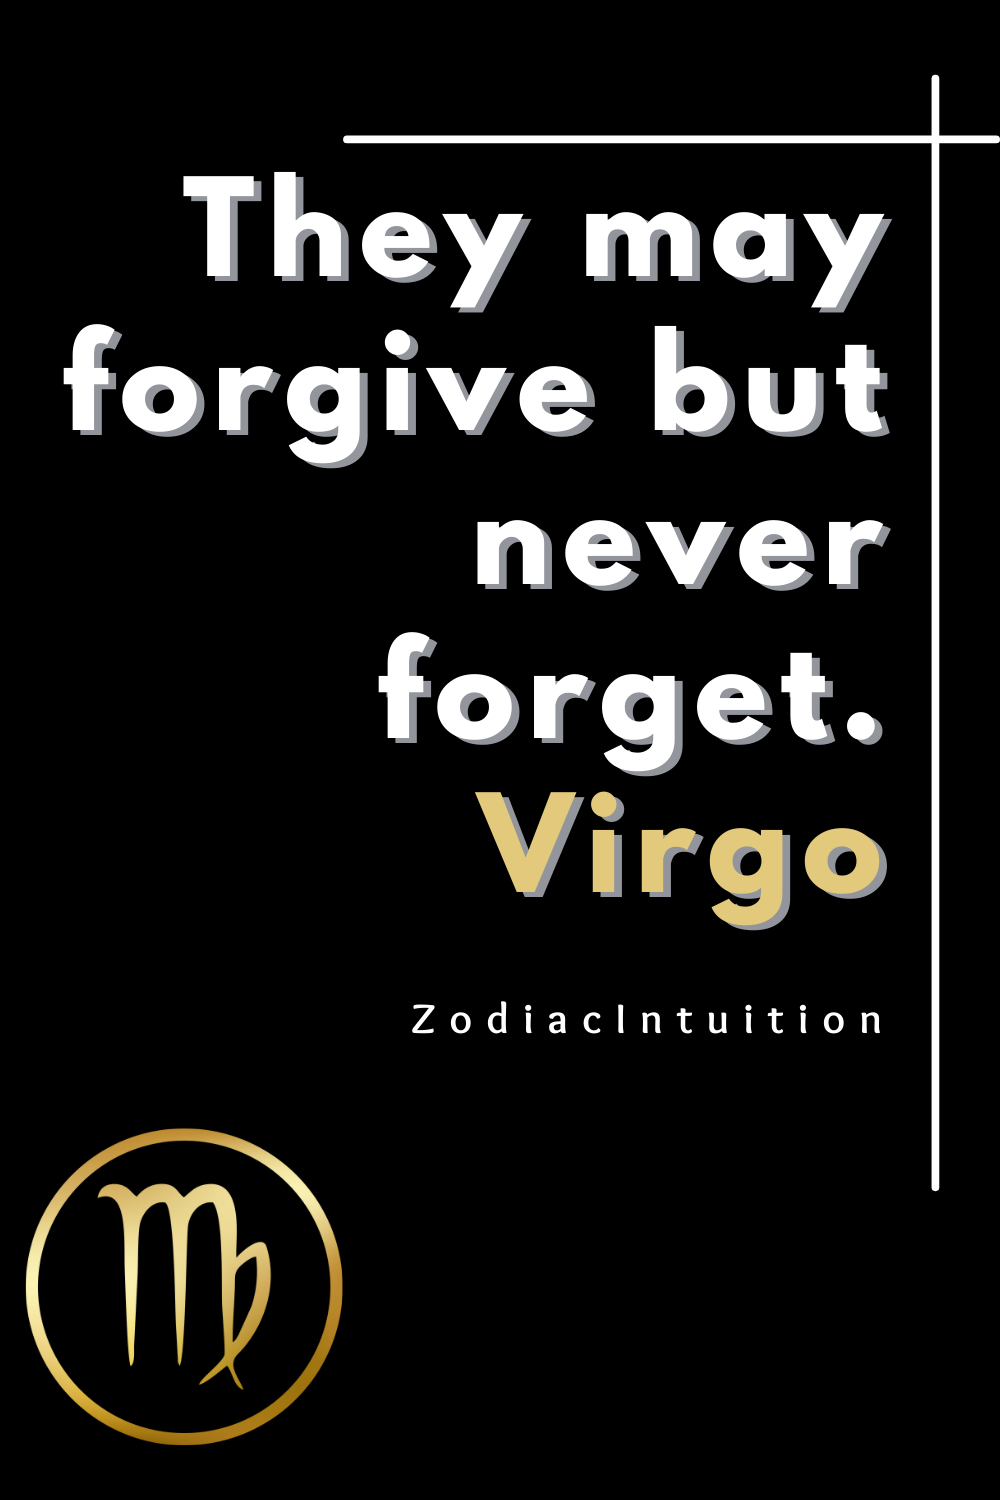 Virgo Zodiac Sign Unleashed: 10 Quotes Igniting Zodiac Fire!